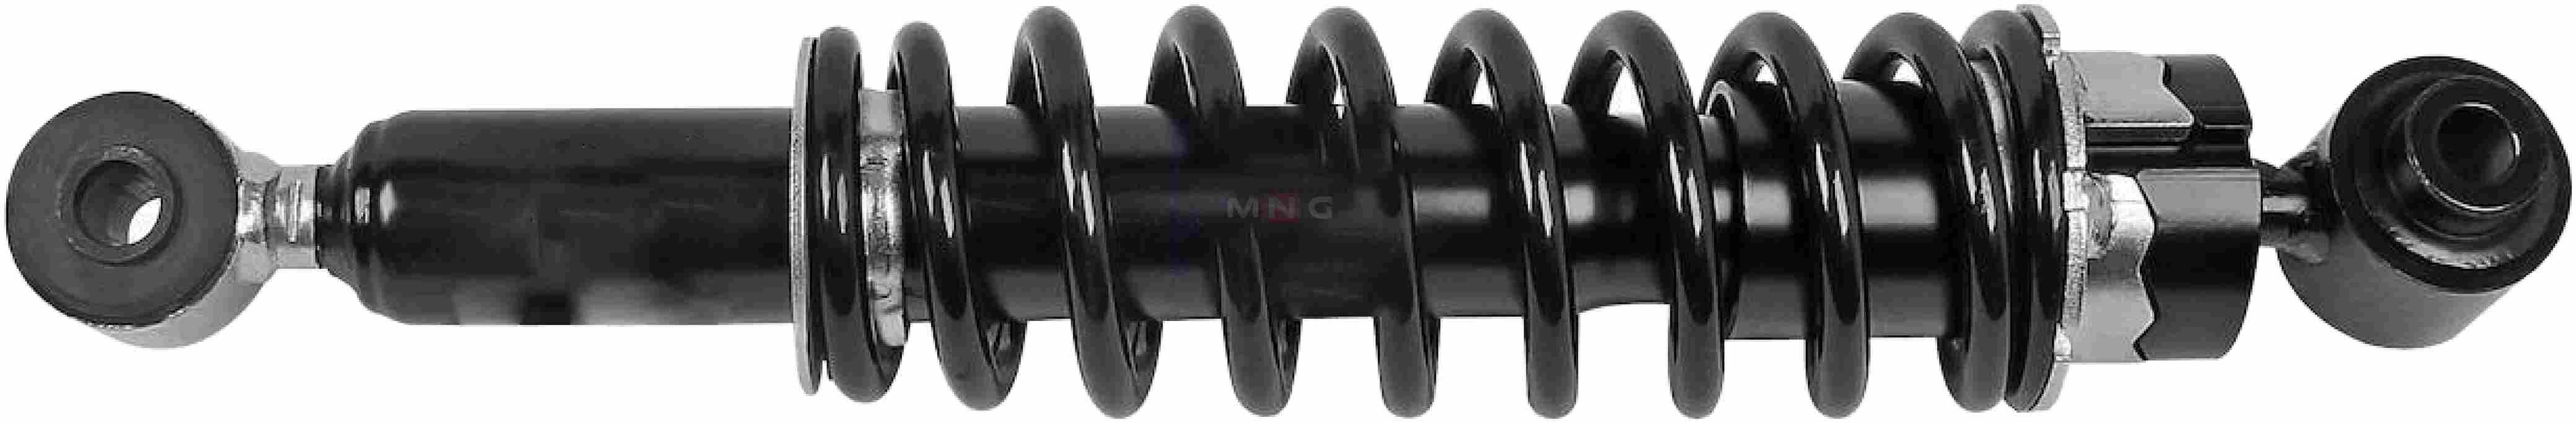 504084380-MNG-SHOCK-ABSORBER-IVECO